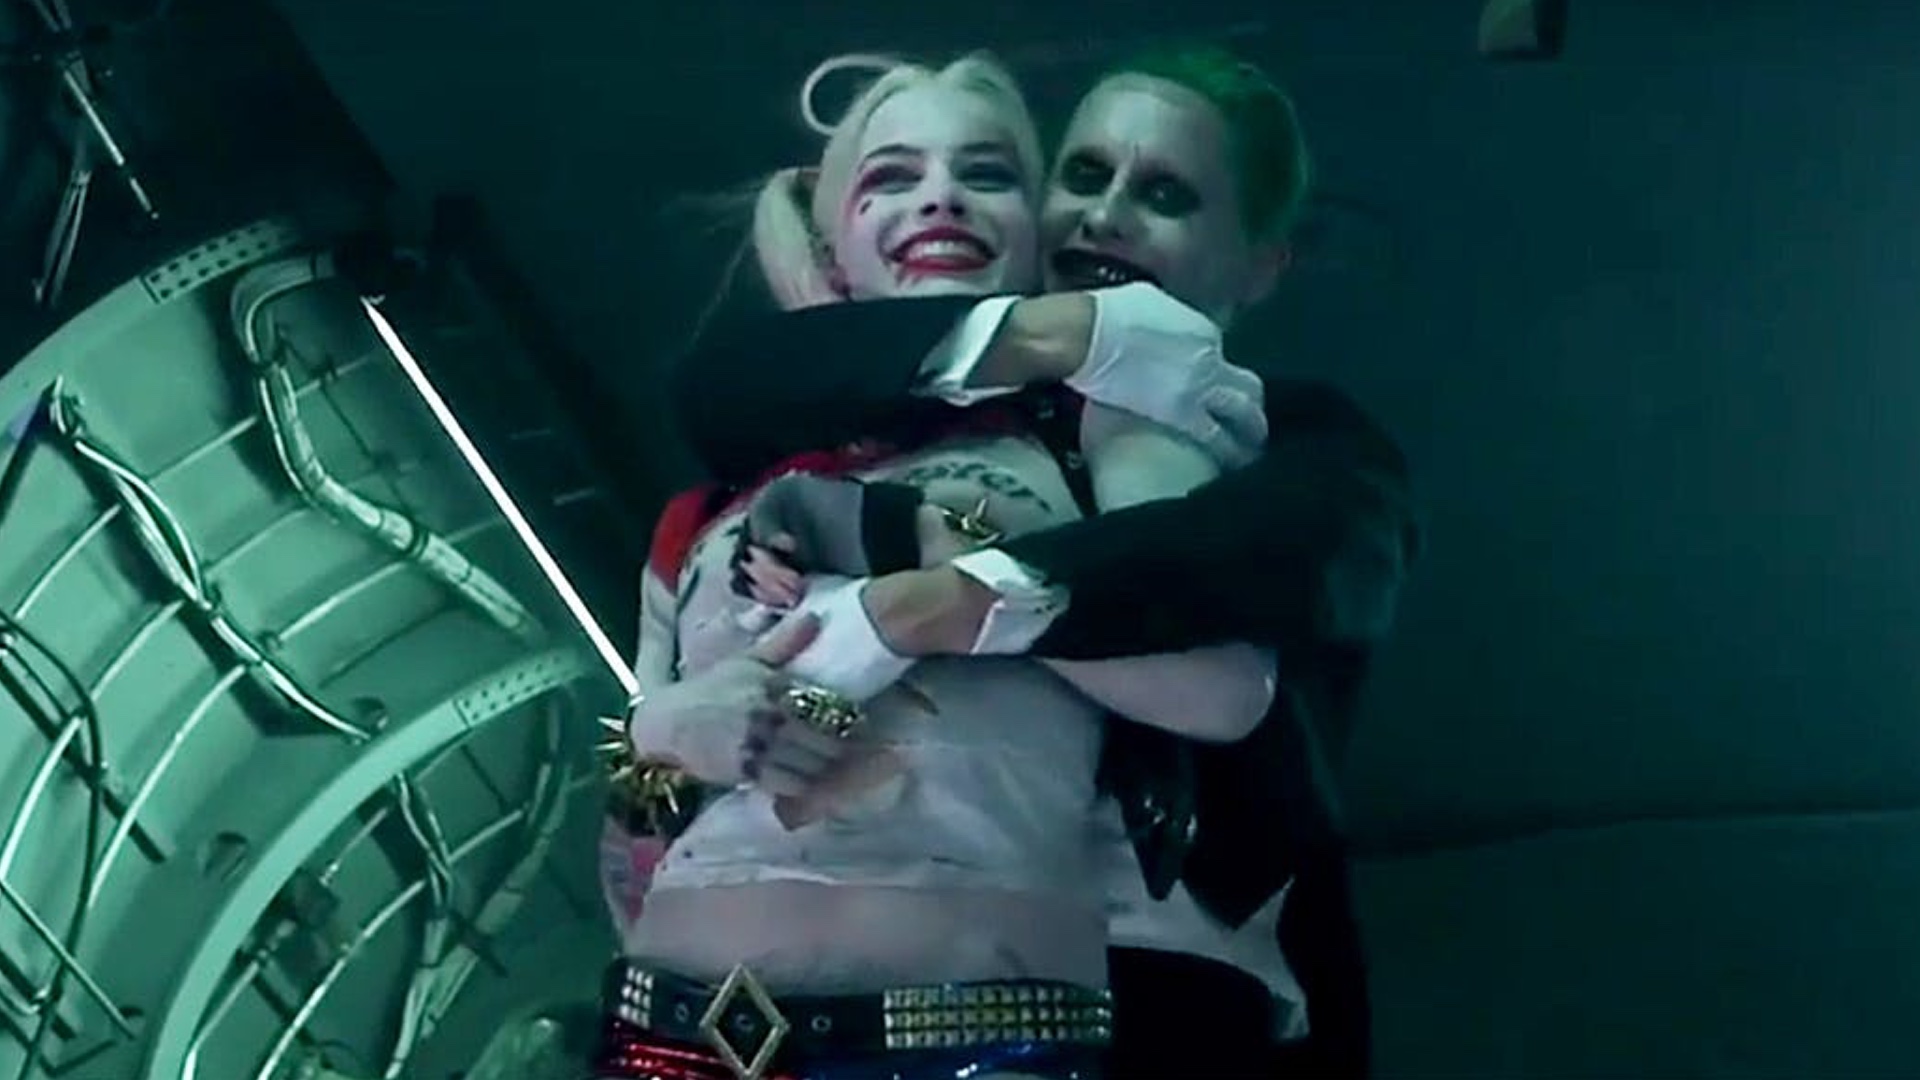 Suicide Squad: Jared Leto on playing the Joker